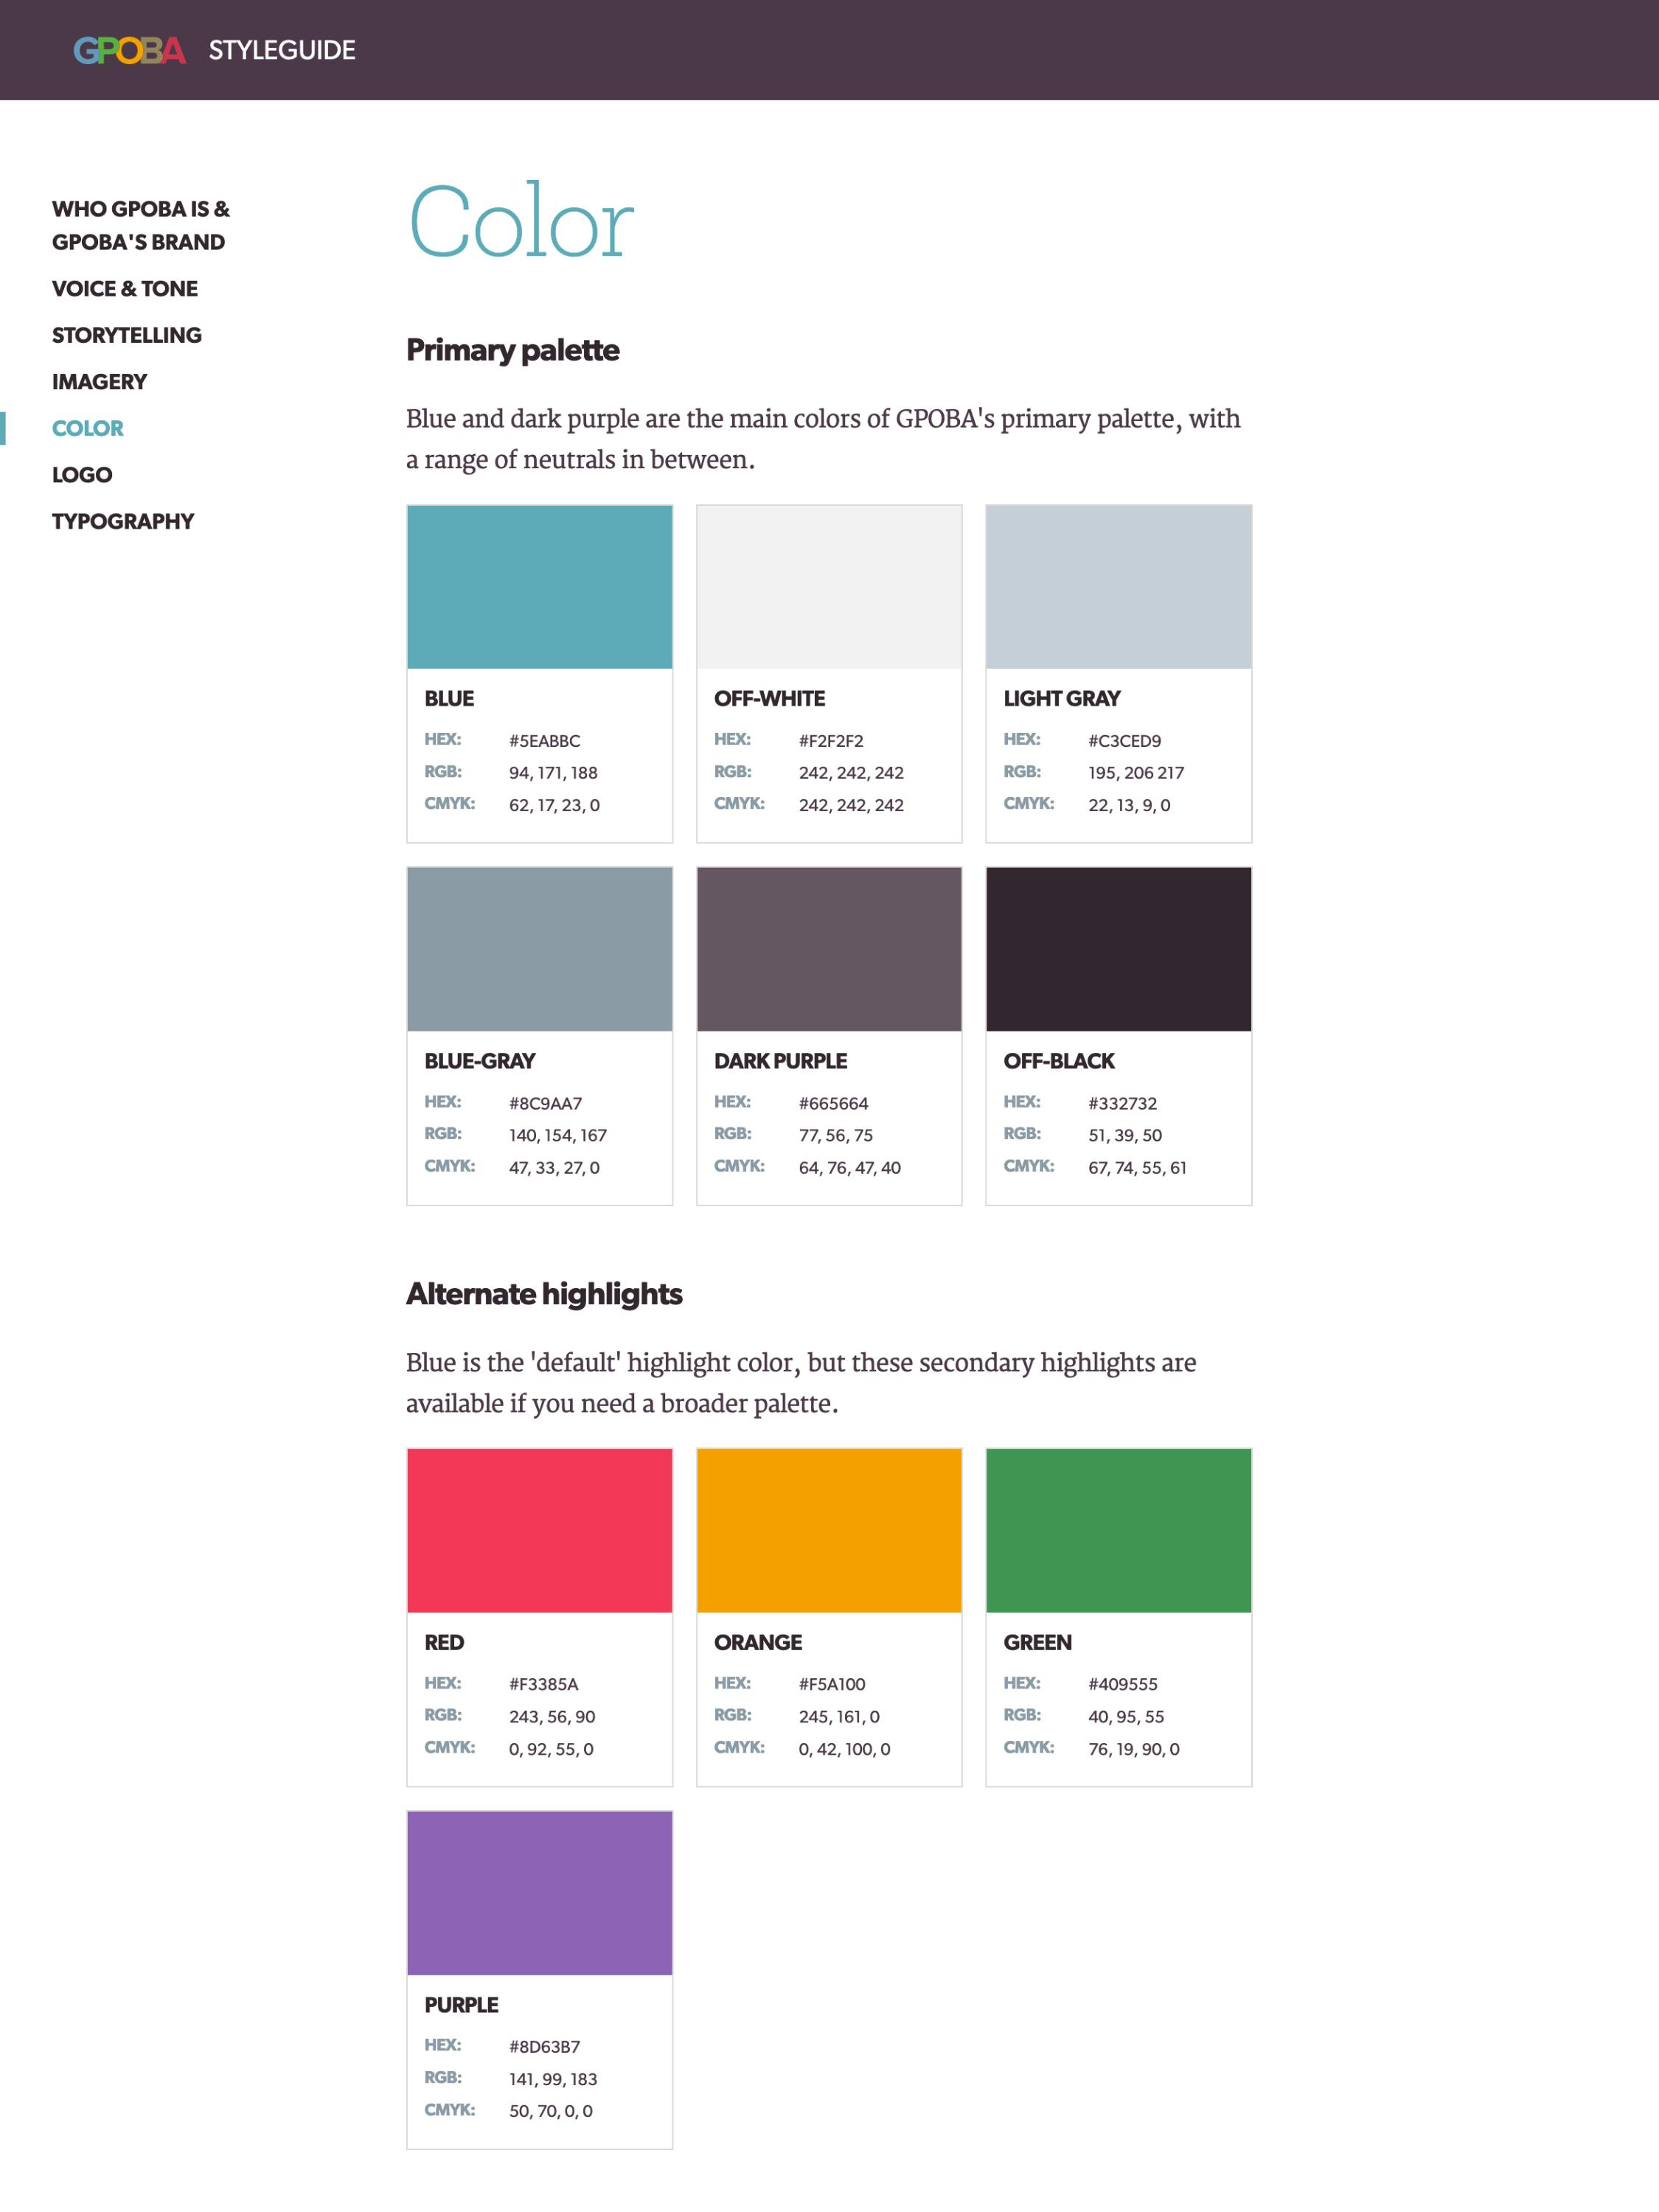 The color palette page of the GPOBA brand styleguide